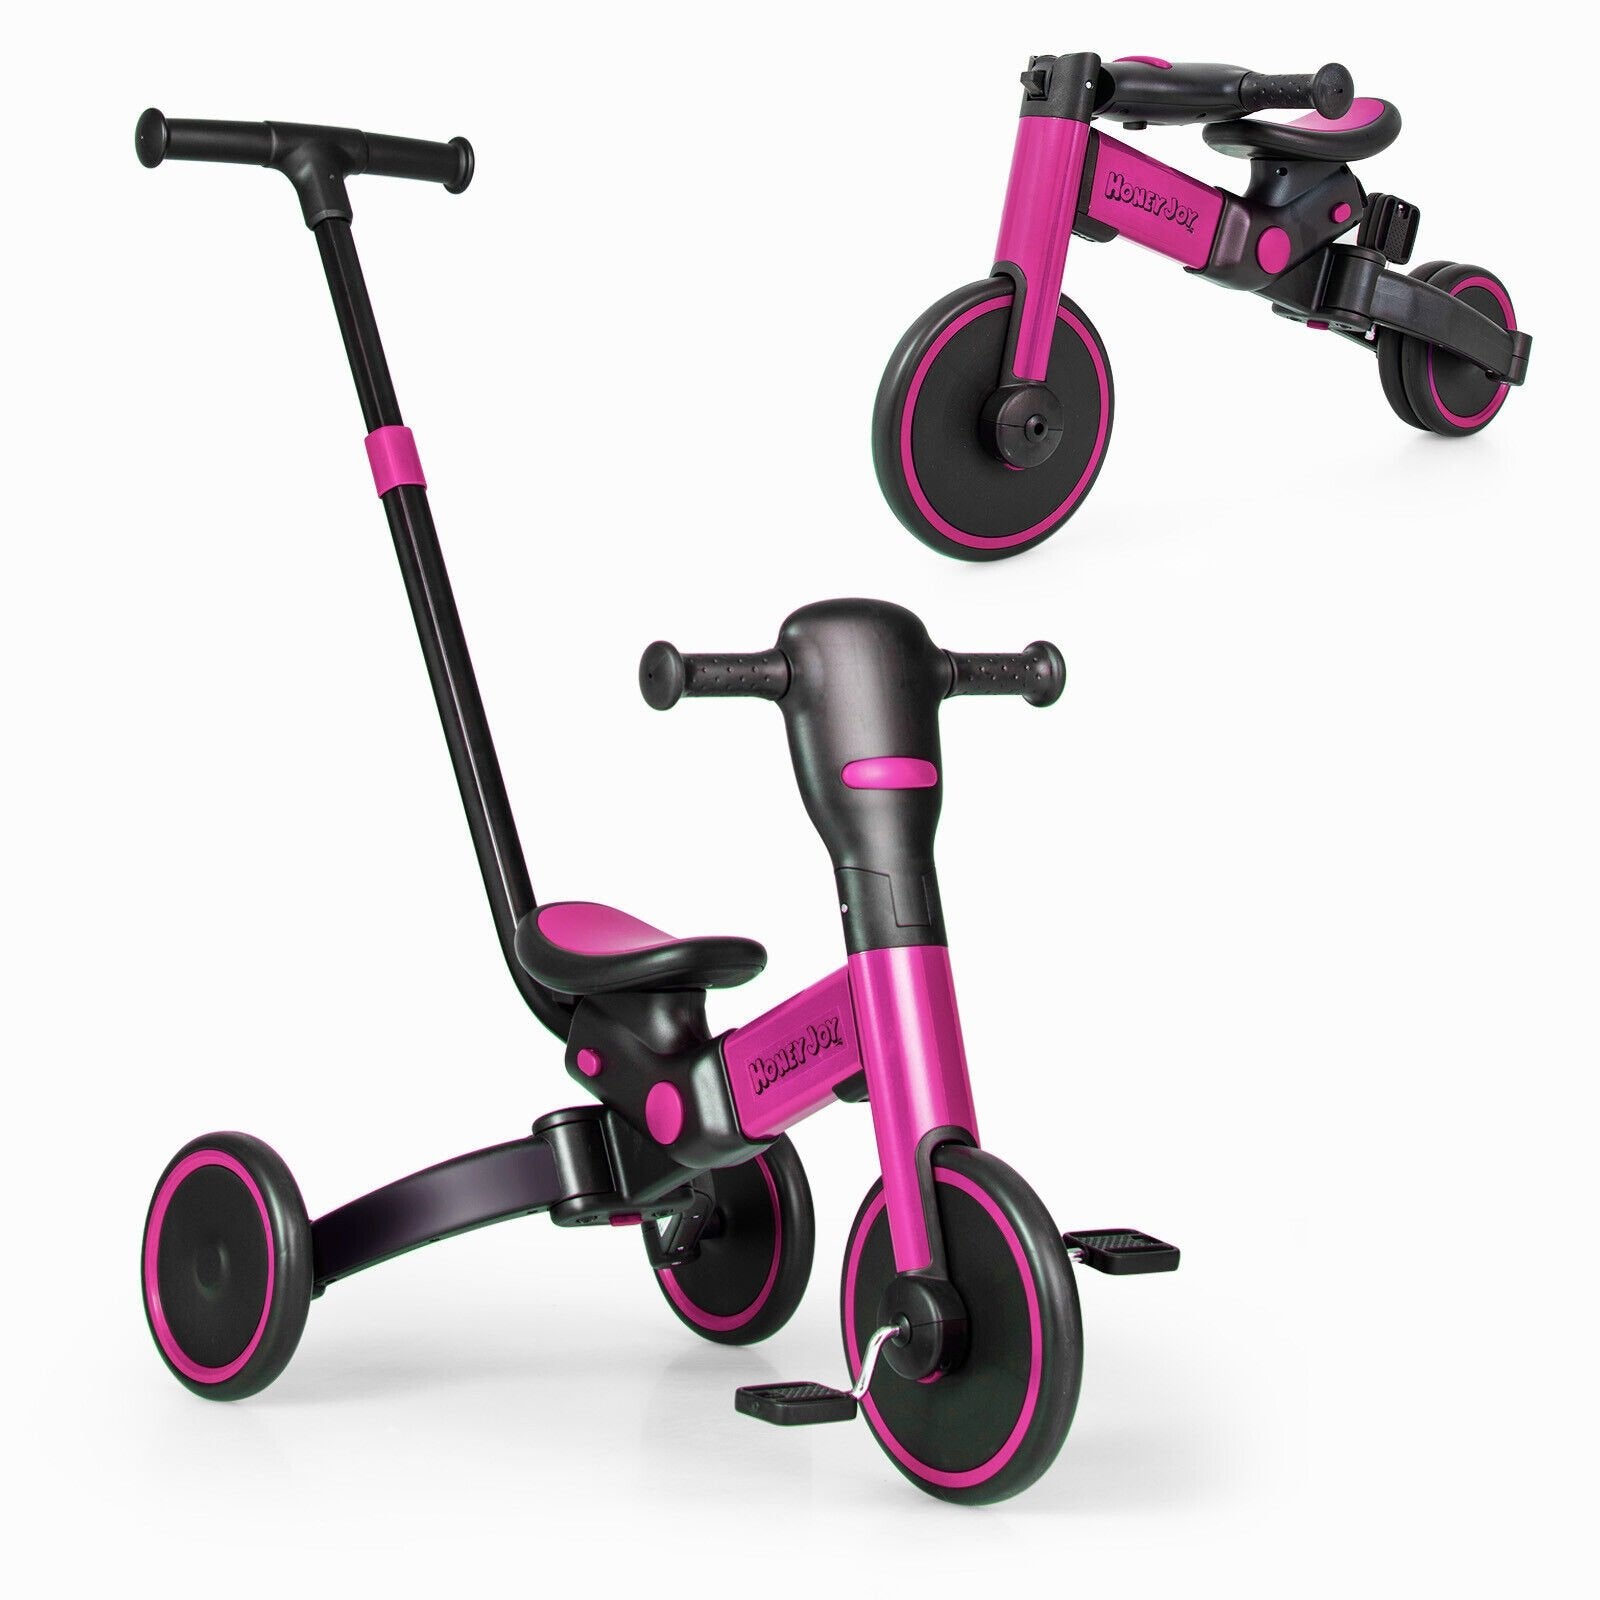 4-in-1 Kids Tricycle with Adjustable Parent Push Handle and Detachable Pedals, Pink - Gallery Canada